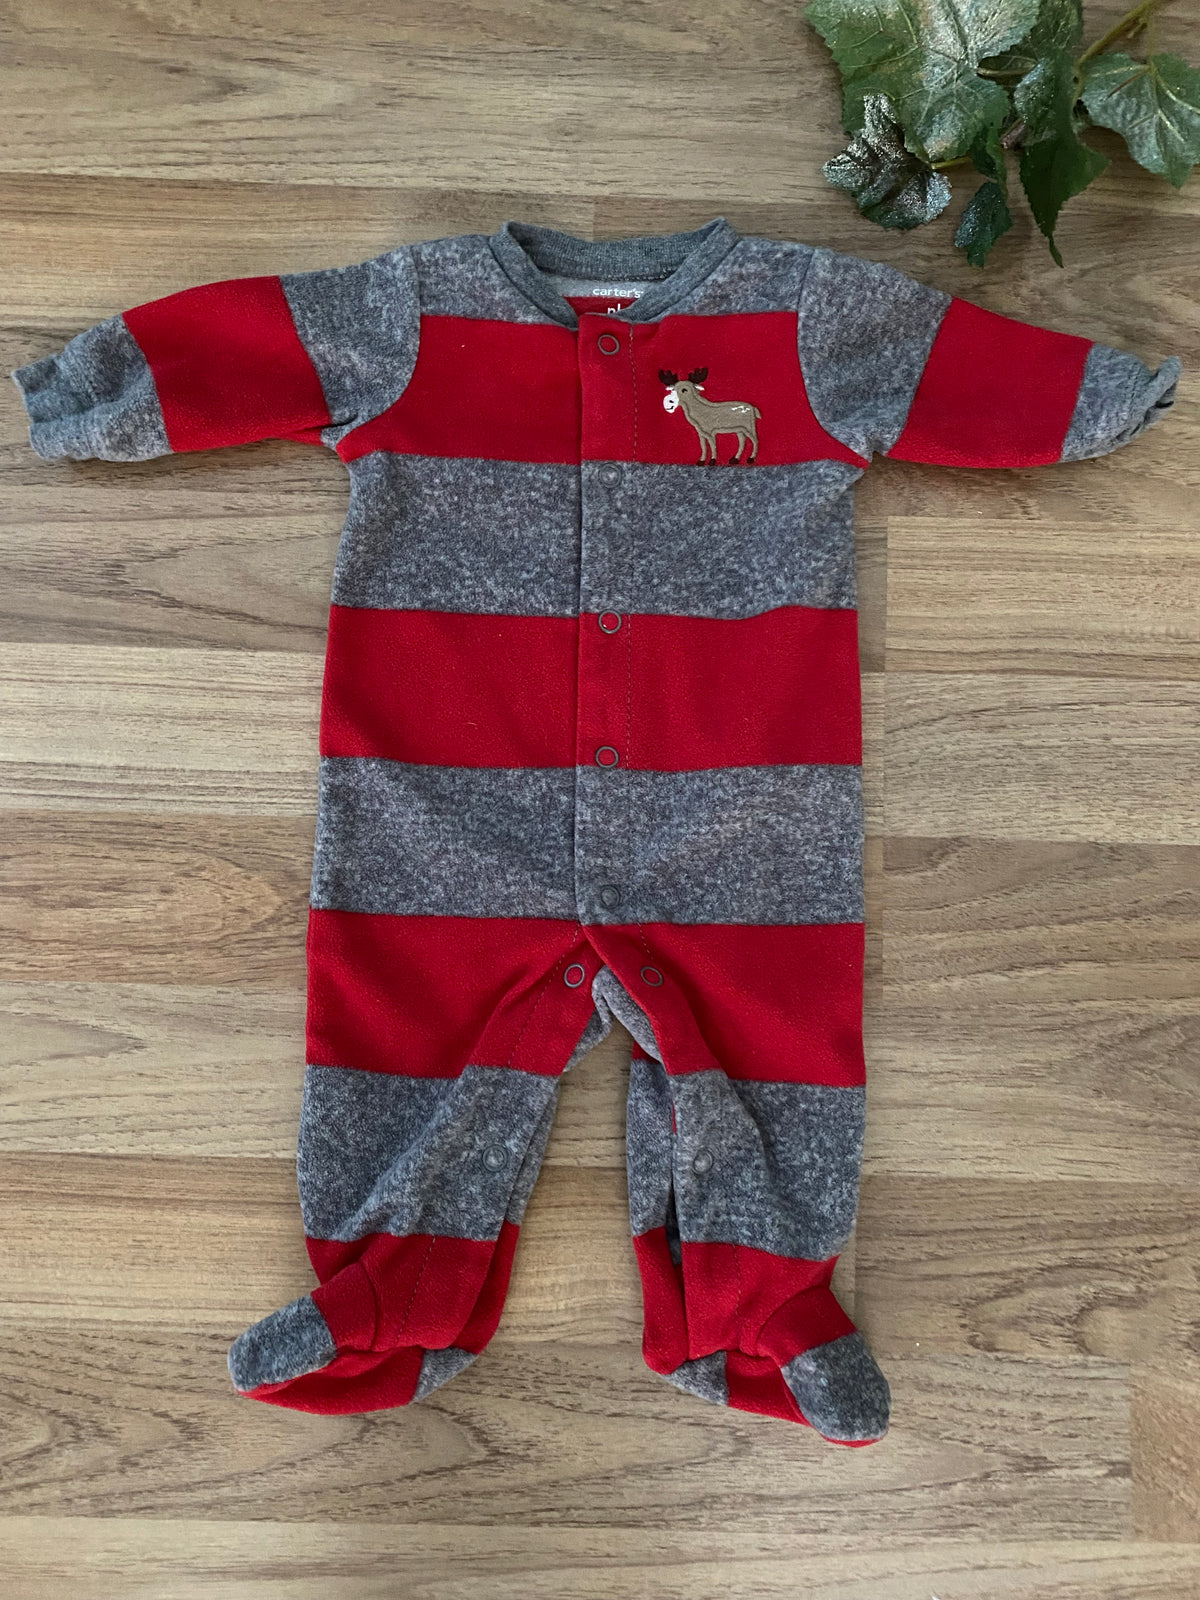 Full Button Up Footed Sleeper (Boys Size 0-3)